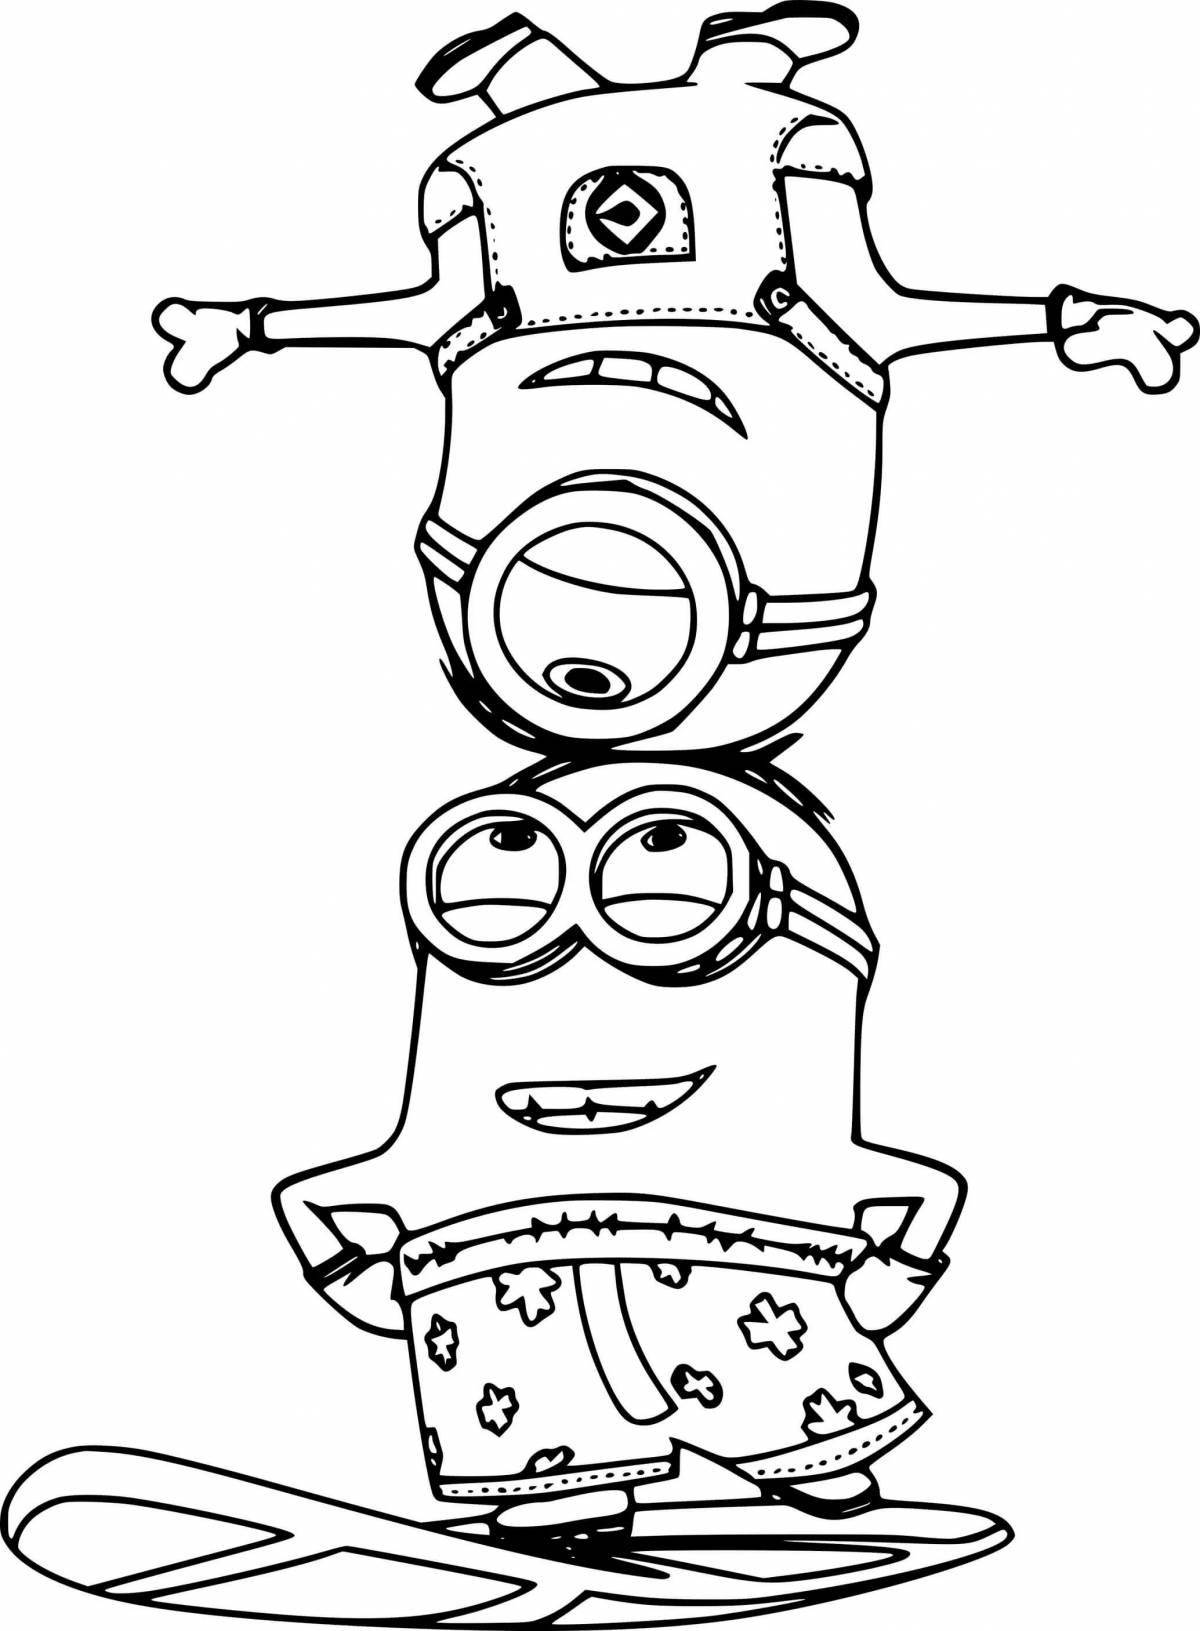 Charming minion coloring book